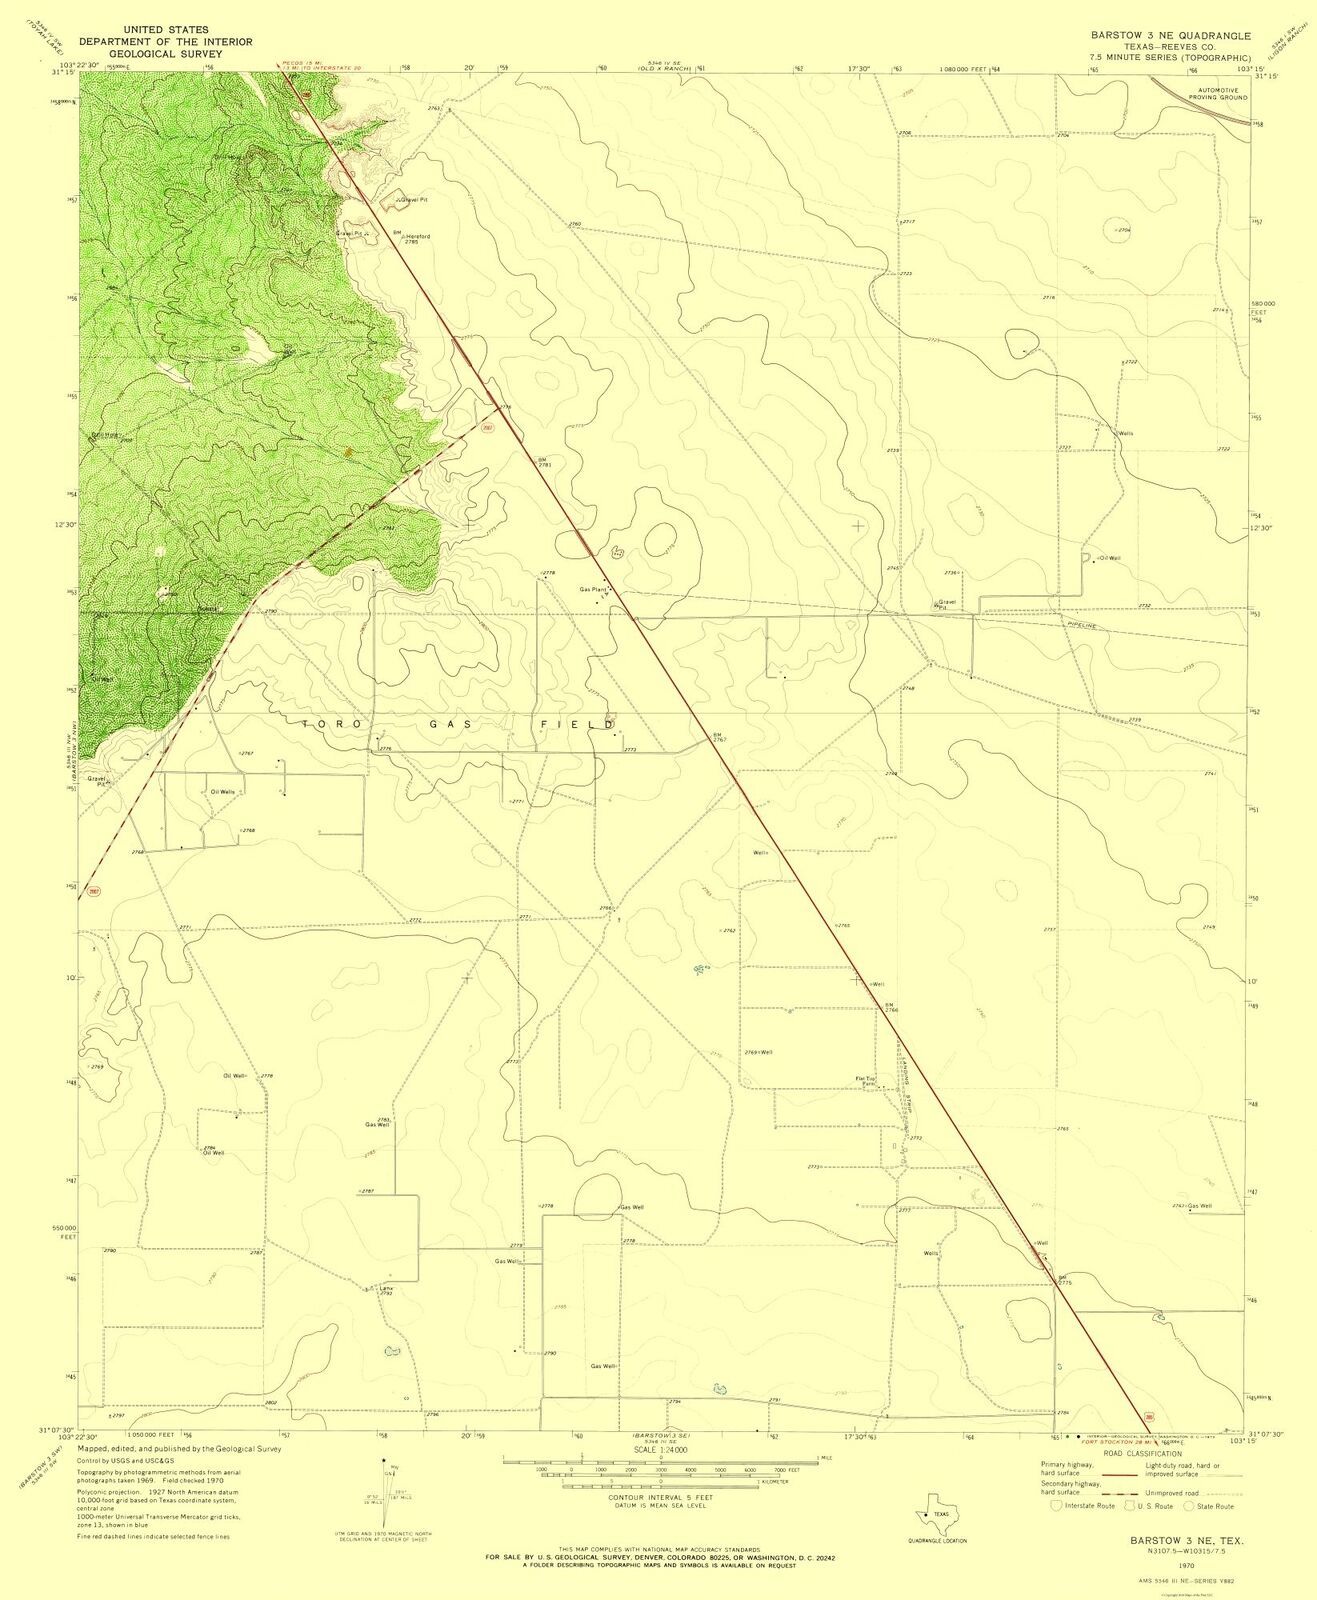 Primary image for Topo Map - Barstow Texas Quad - USGS 1970 - 23.00 x 27.95